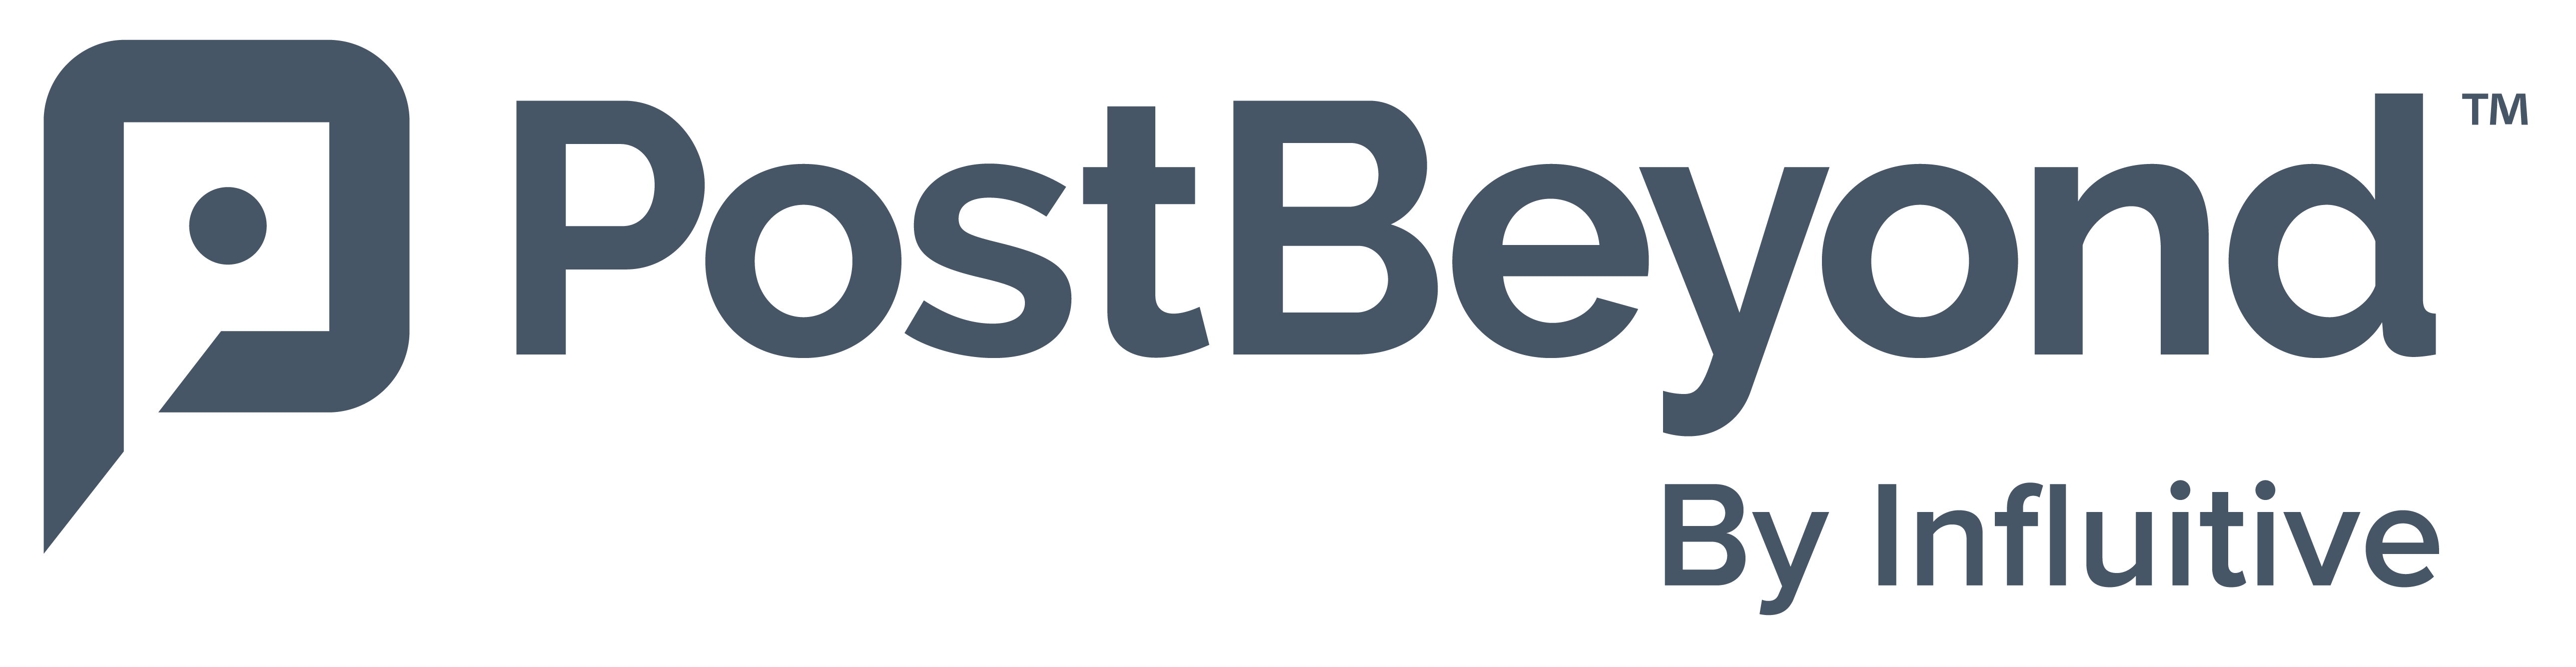 PostBeyond-by-Influitive